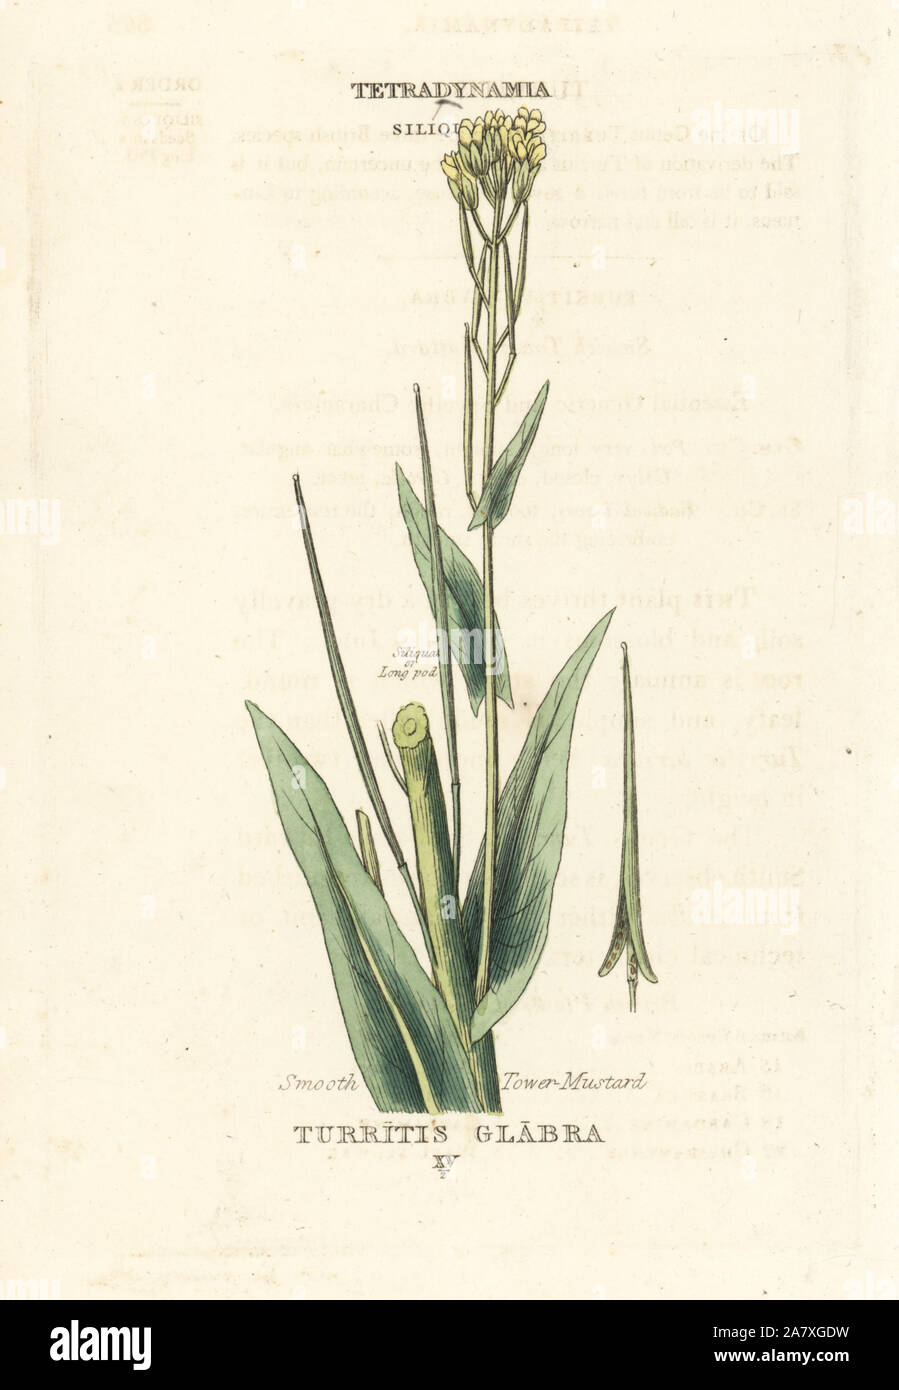 Smooth tower mustard, Turritis glabra. Handcoloured copperplate engraving after an illustration by Richard Duppa from his The Classes and Orders of the Linnaean System of Botany, Longman, Hurst, London, 1816. Stock Photo